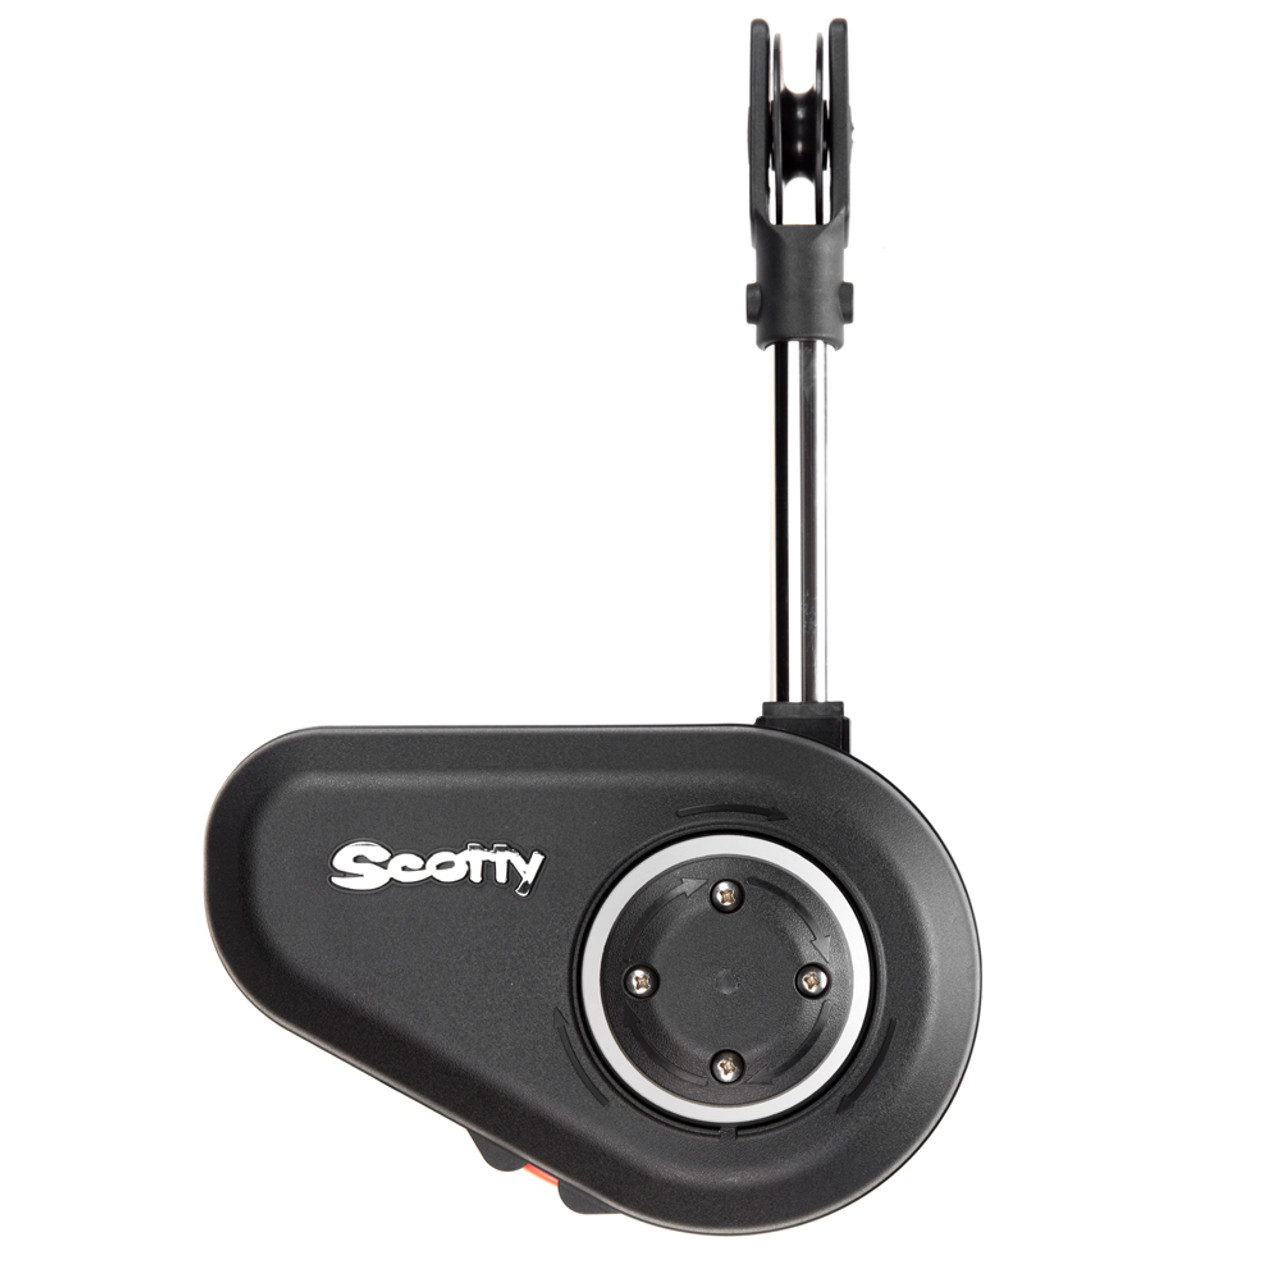 SCOTTY 2500 ELECTRIC LINE PULLER